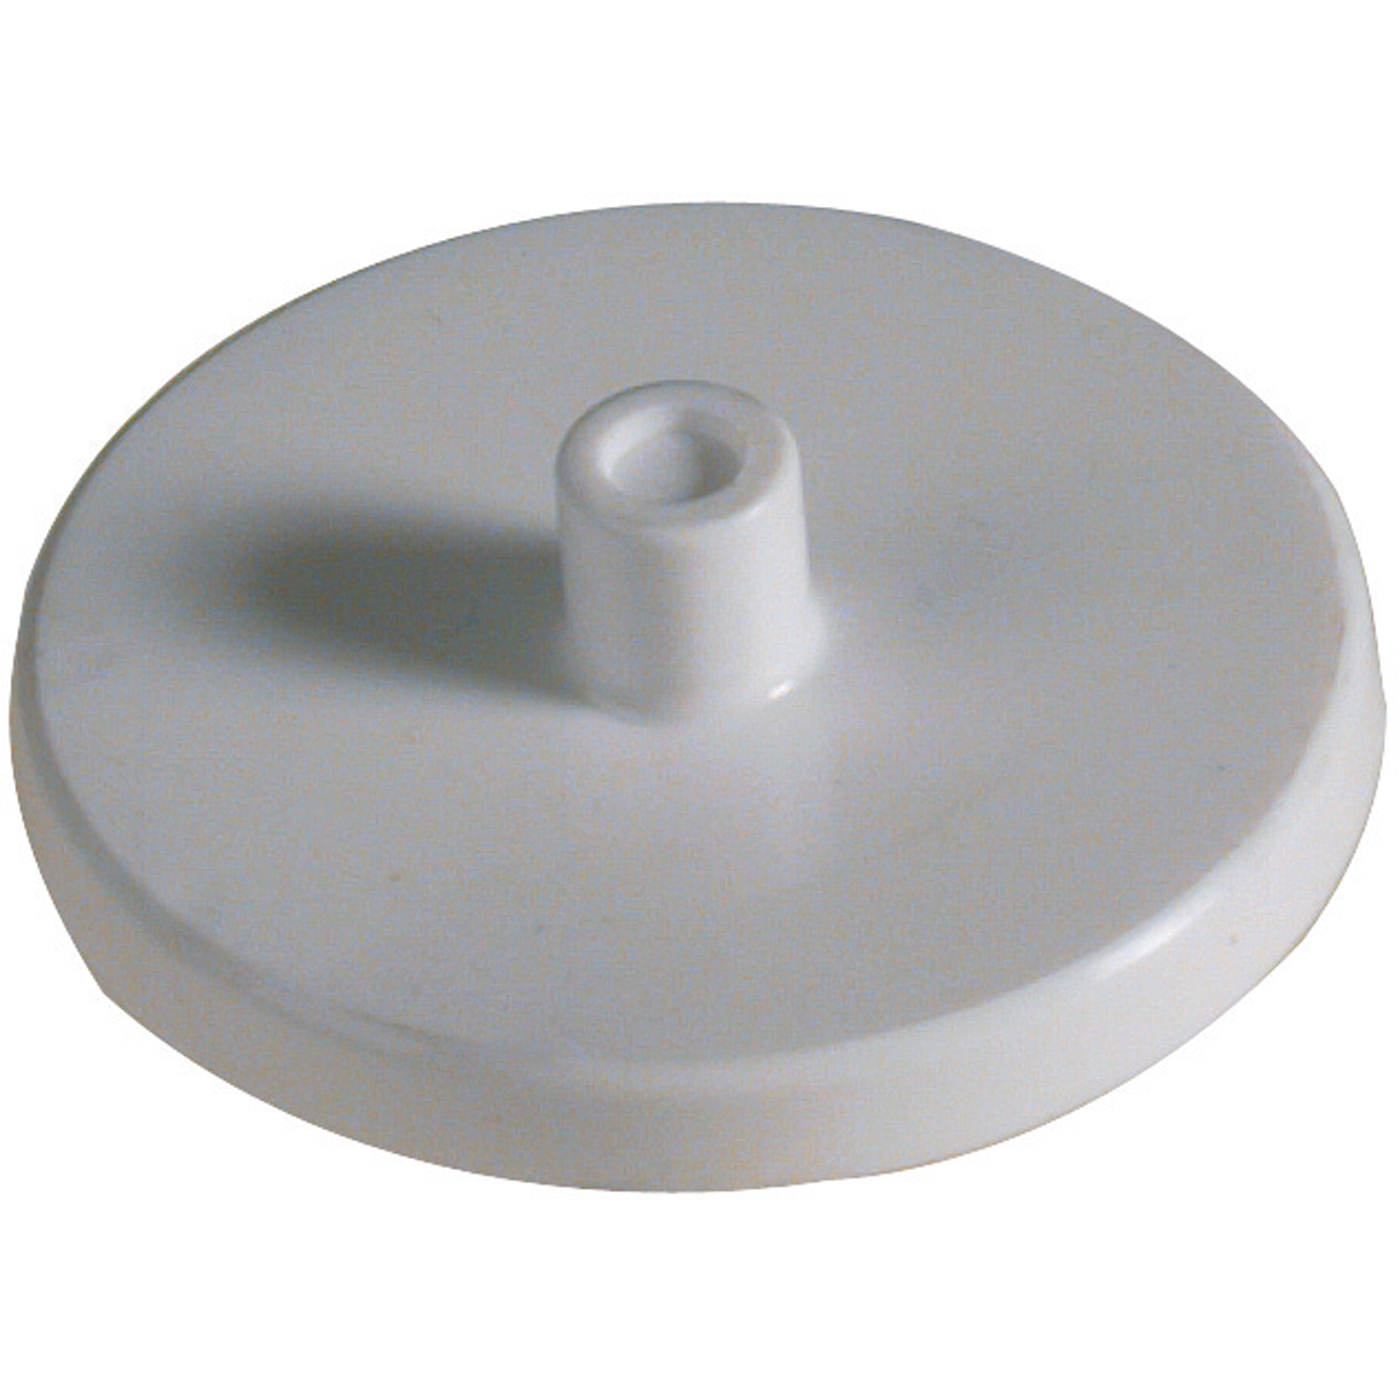 Lid, for FINOMIX Mixing Bowl 30 ml - 1 piece